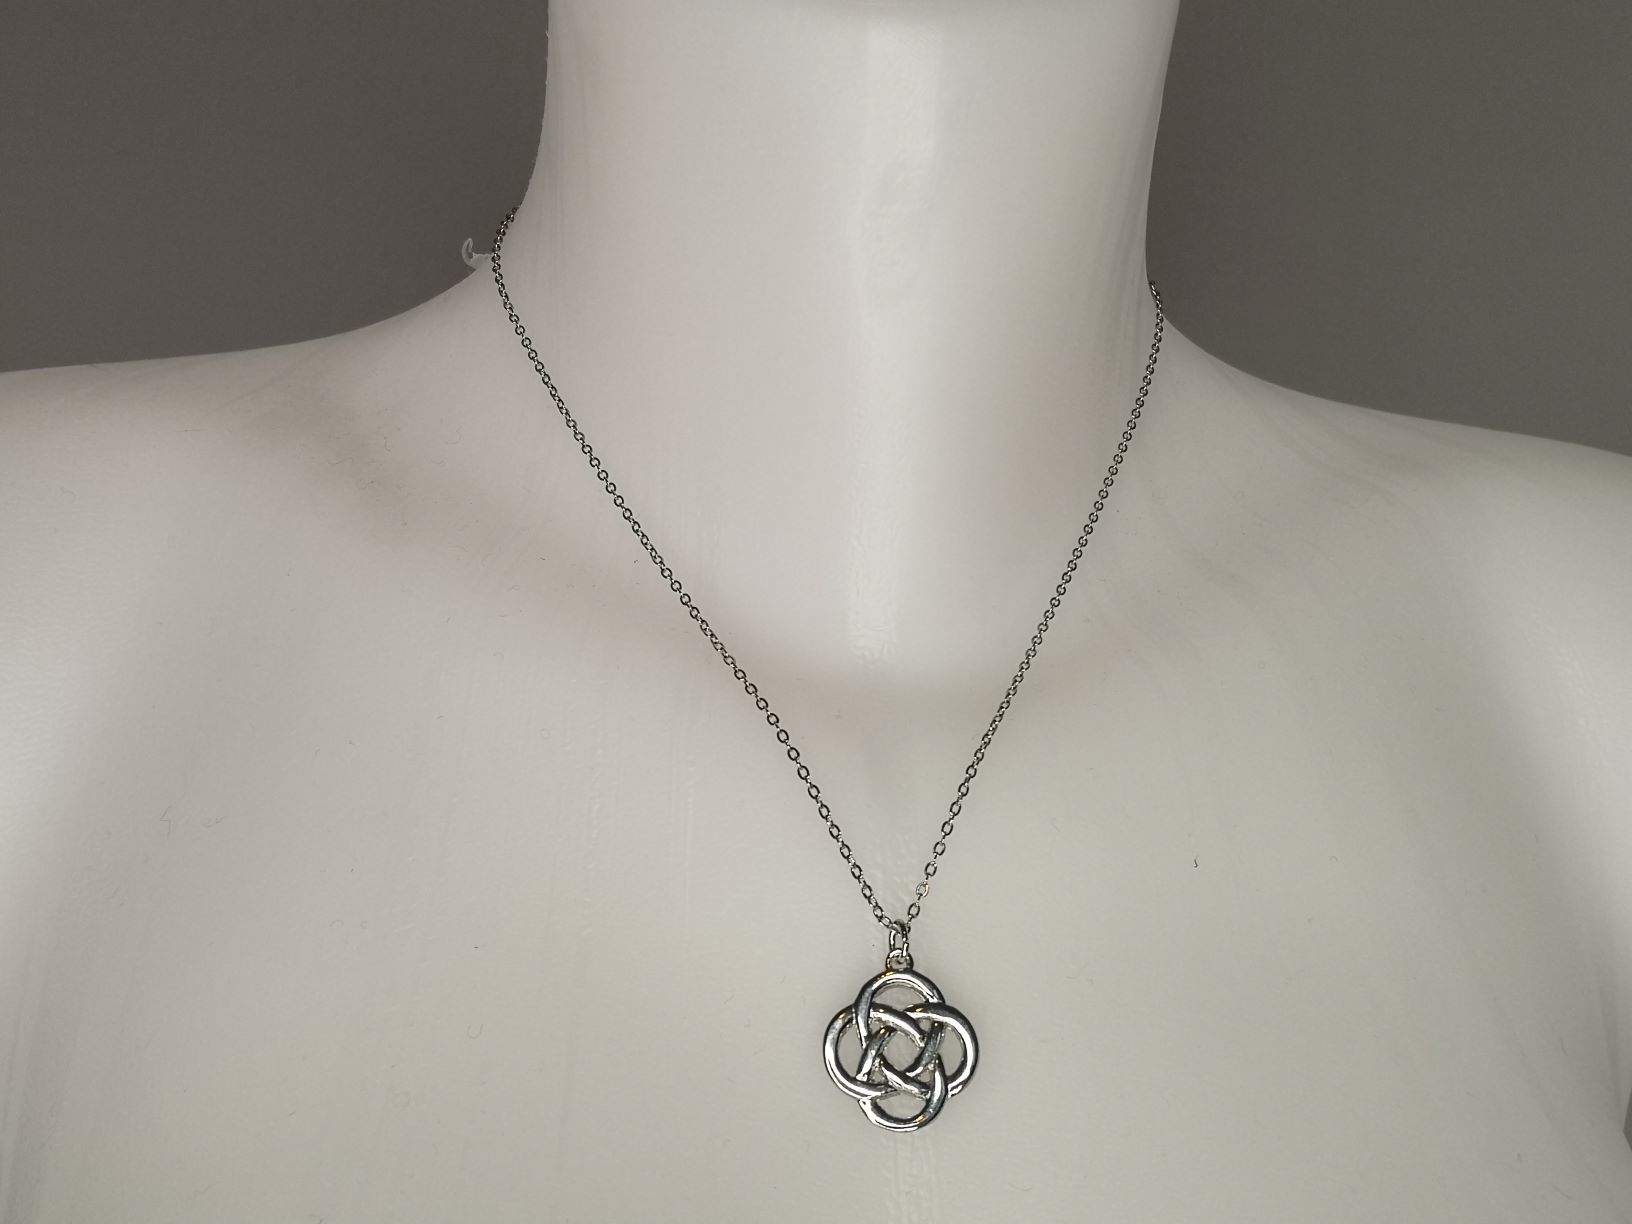 Buy CELTIC Knot Necklace IRISH WEDDING Jewelry Bridesmaid Gifts Variety  Pearl Color Sterling Silver Wedding Jewellery Online in India - Etsy